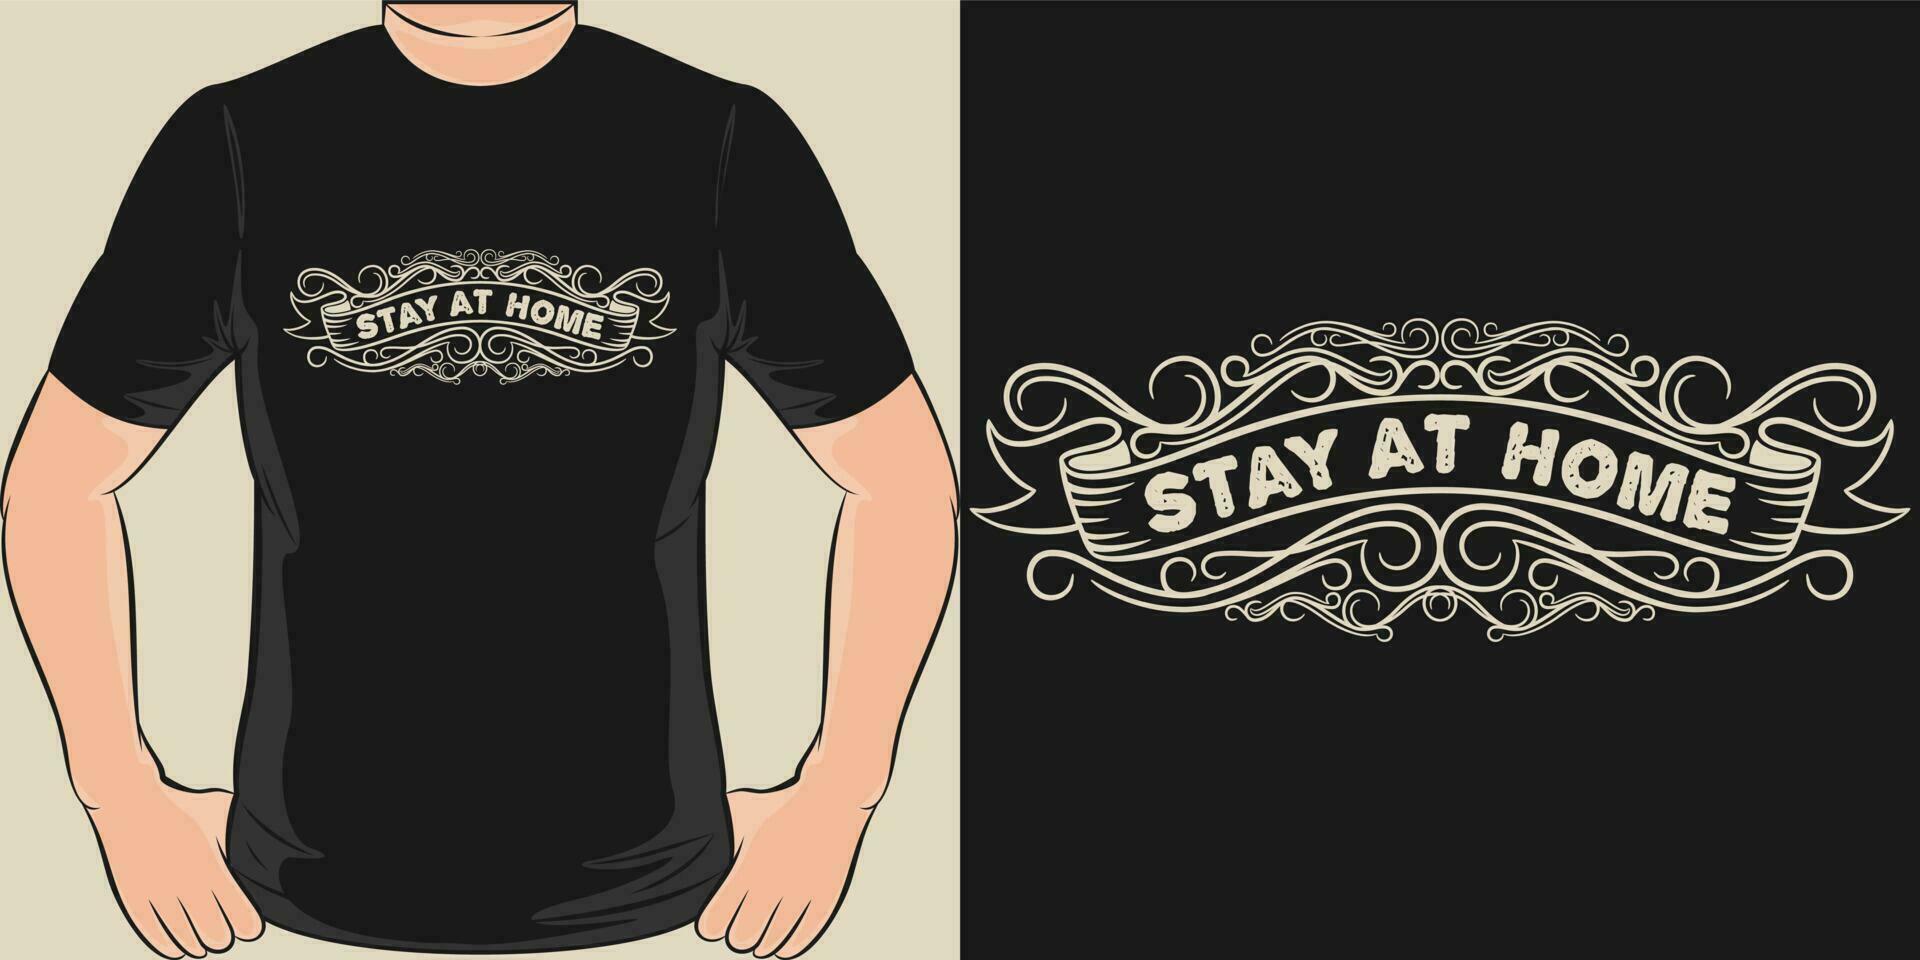 Stay at Home, Covid-19 Quote T-Shirt Design. vector